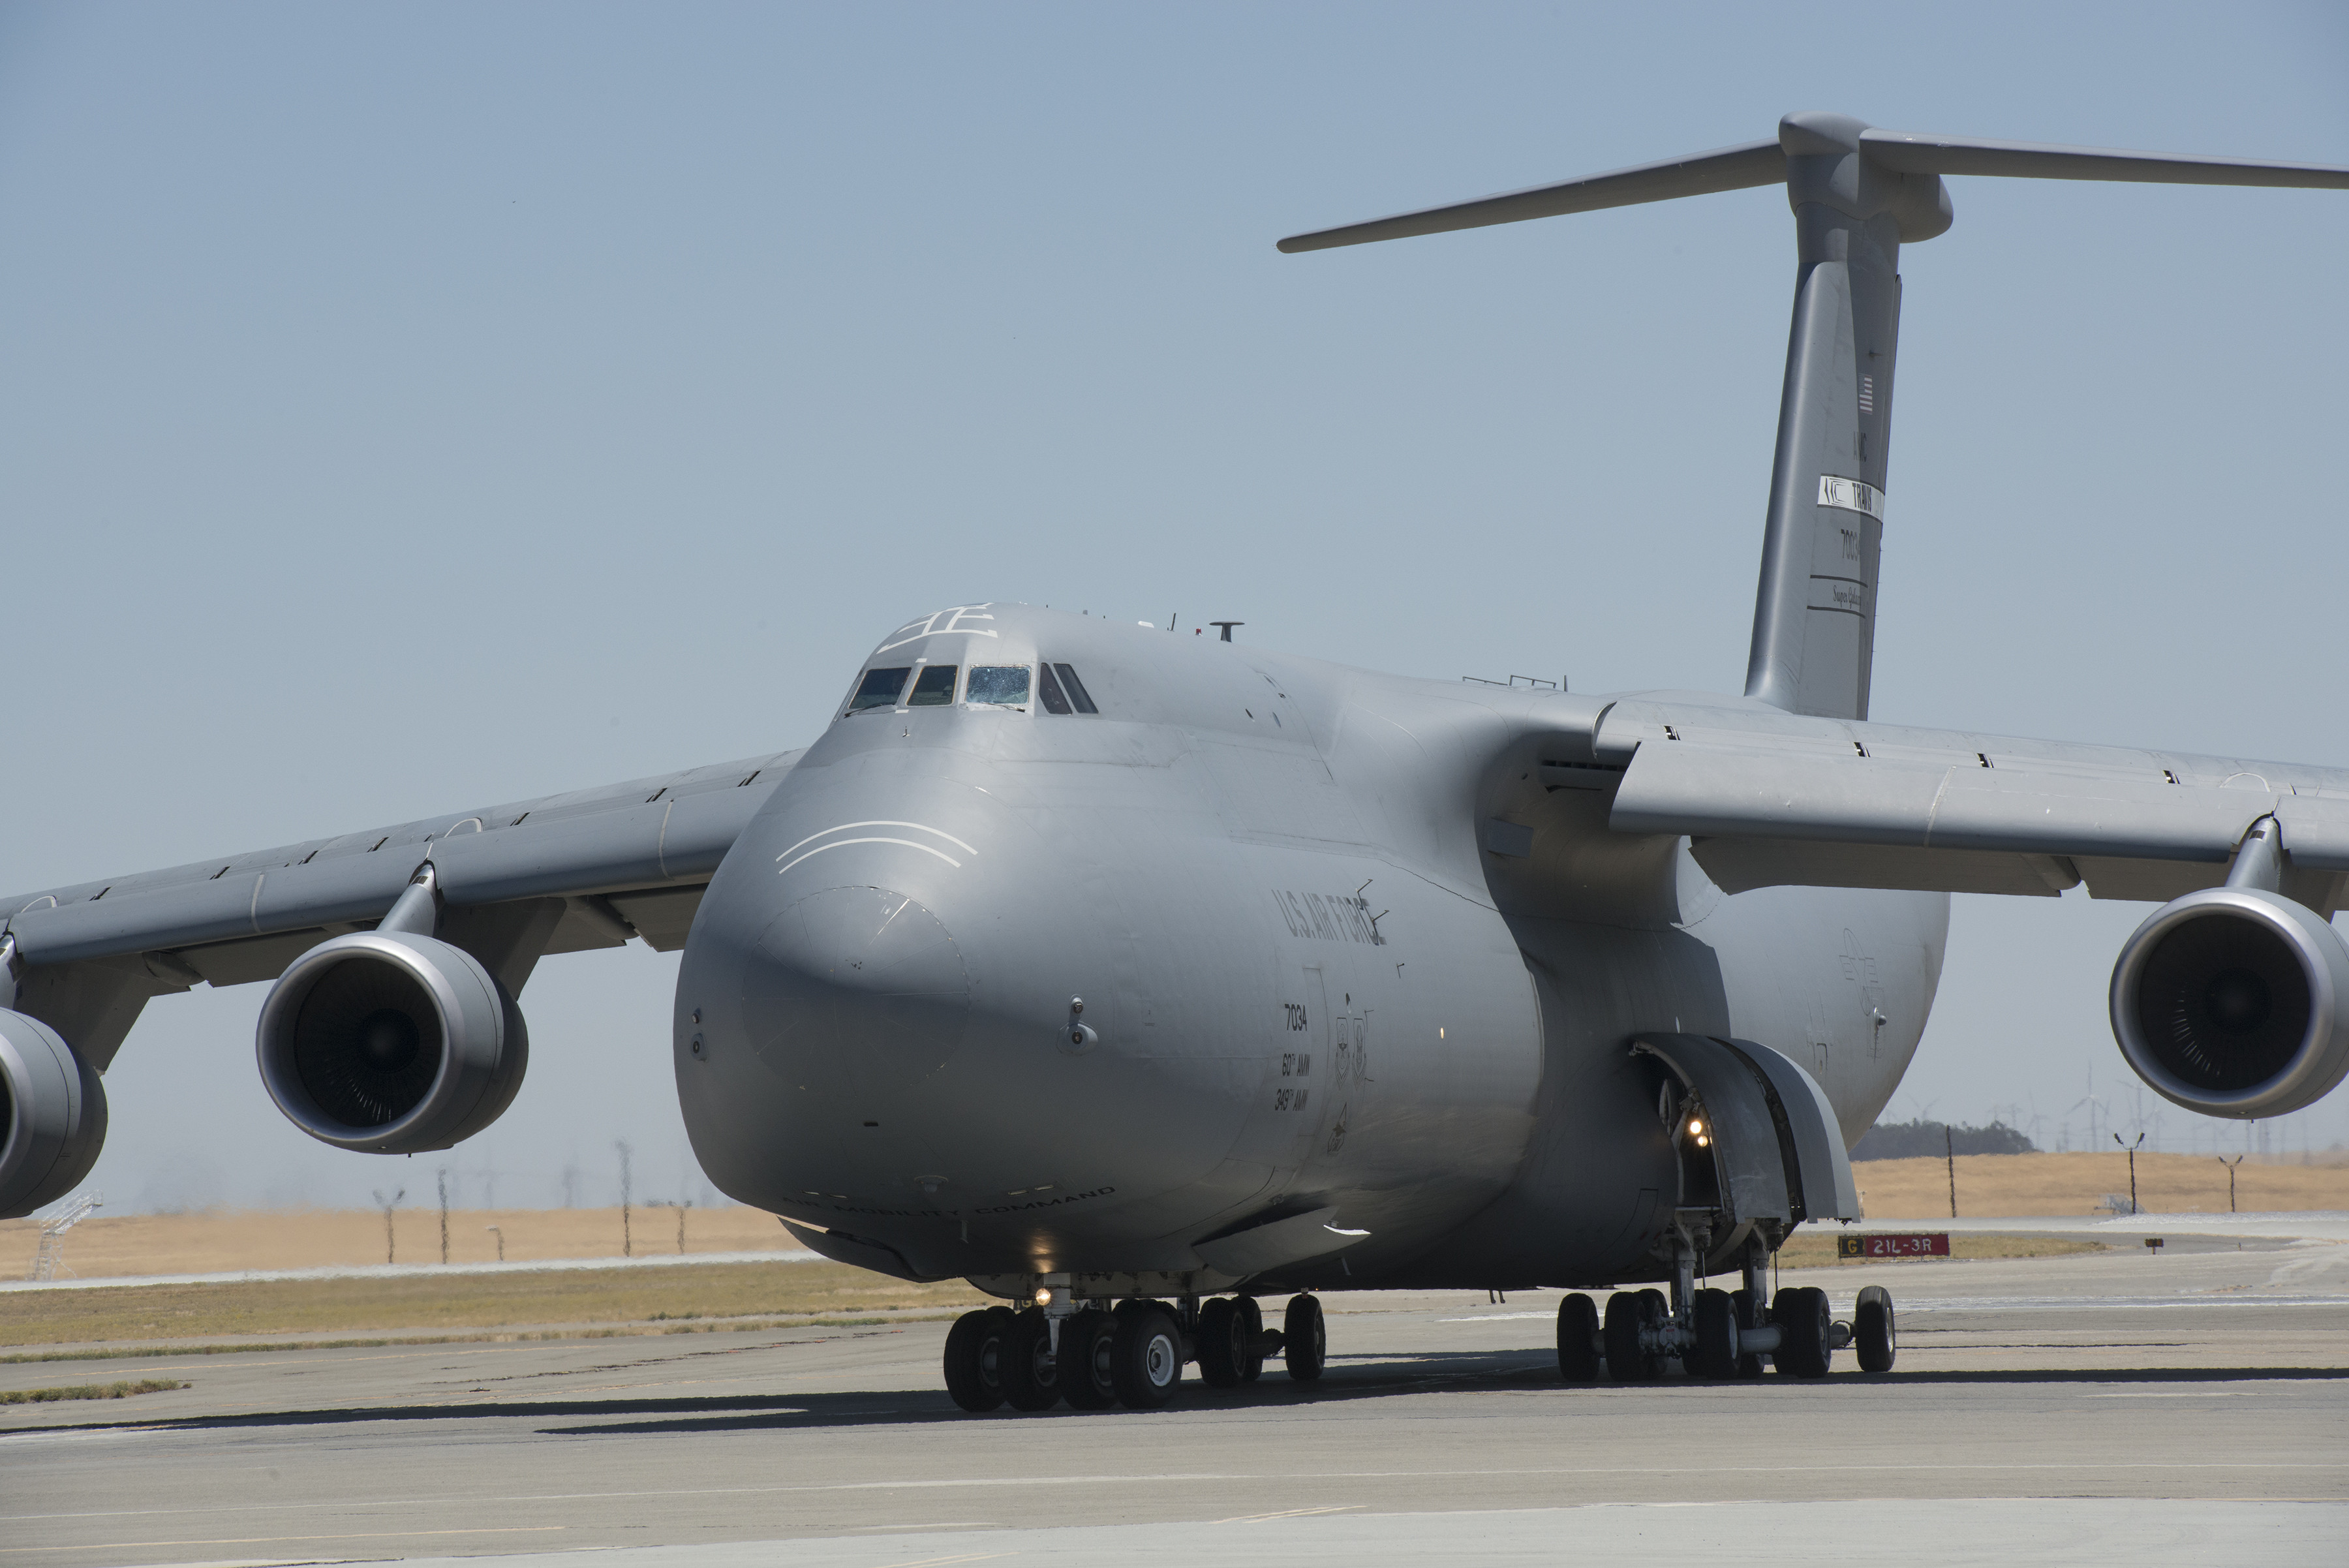 A C-5 M Super Galaxy on the ramp at Travis AFB, Calif., July 28, 2015. As the Air Force’s largest and only strategic airlifter, the C-5M Super Galaxy can carry more cargo farther distances than any other aircraft. This C-5M Super Galaxy is an upgraded version with new engines and modernized avionics designed to extend its service life beyond 2040. (U.S. Air Force Photograph by Heide Couch/Released)